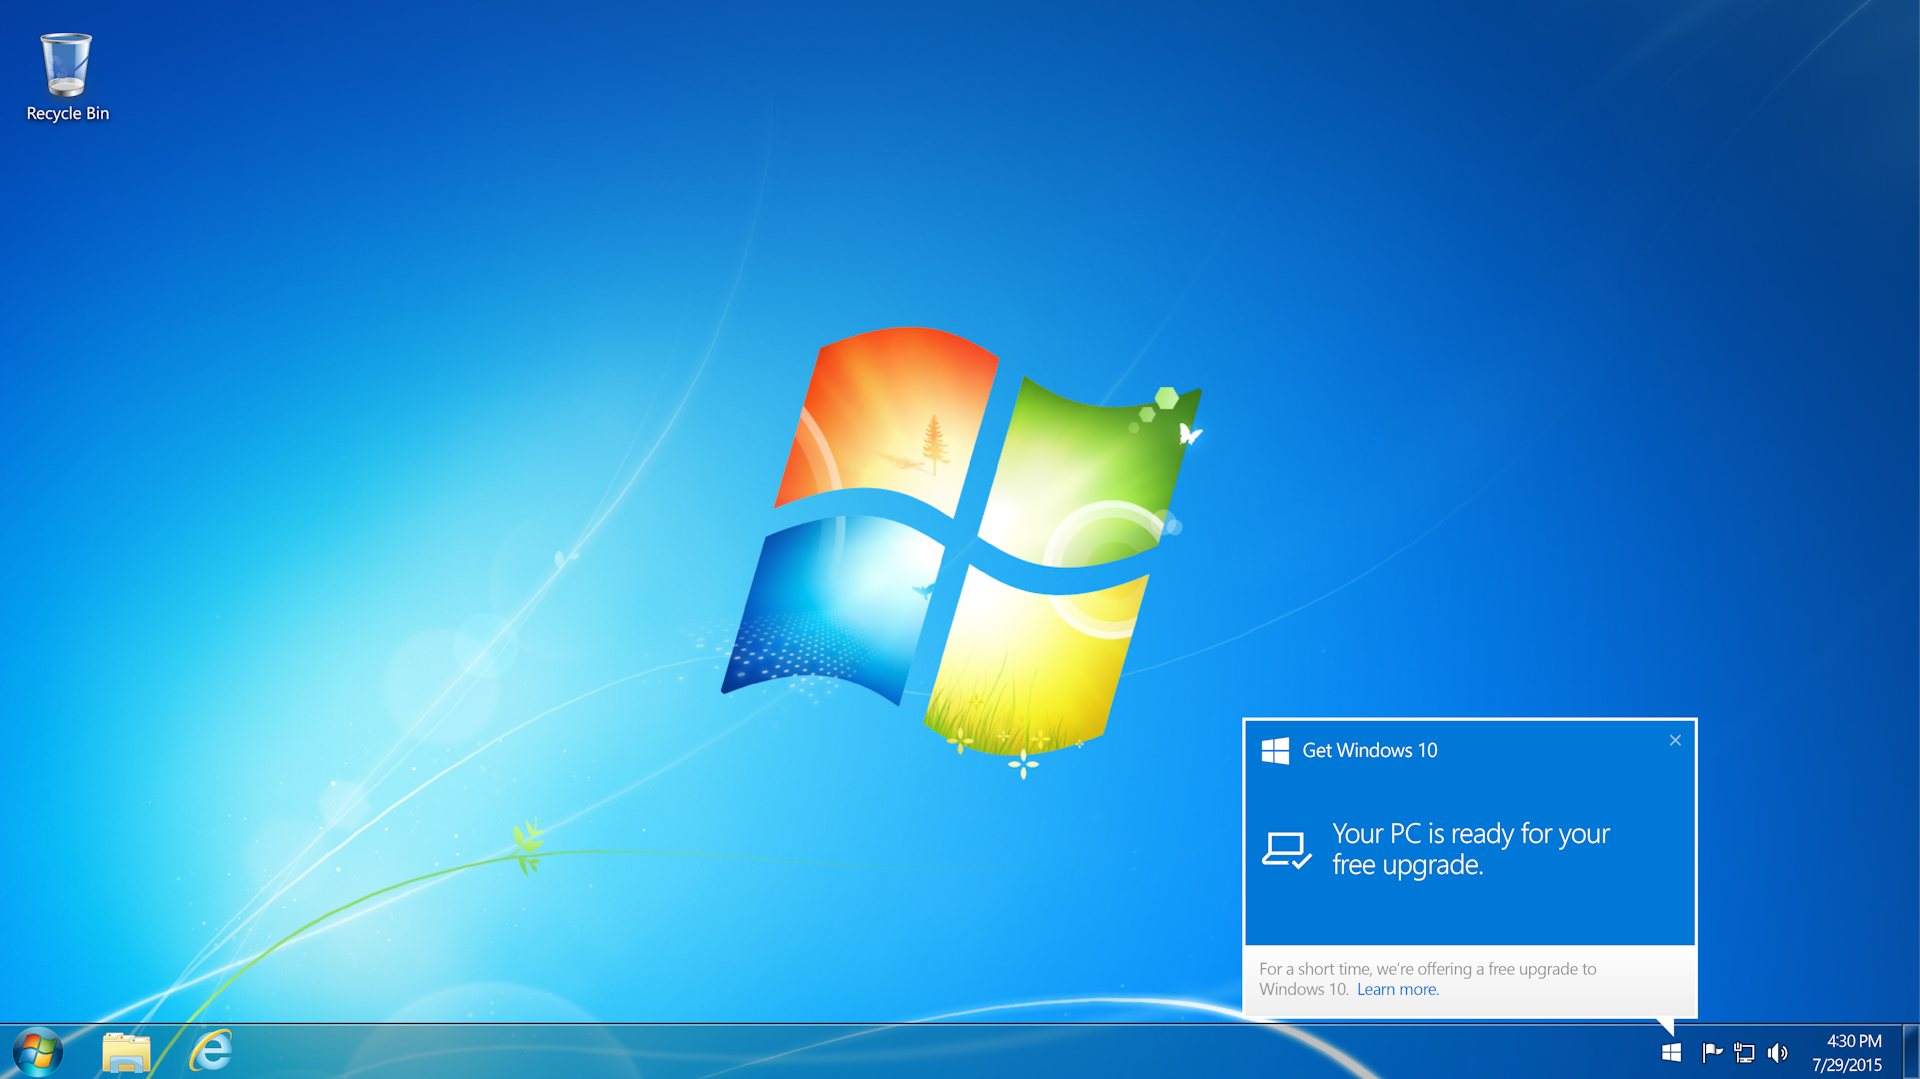 how to reformat windows 10 after free upgrade